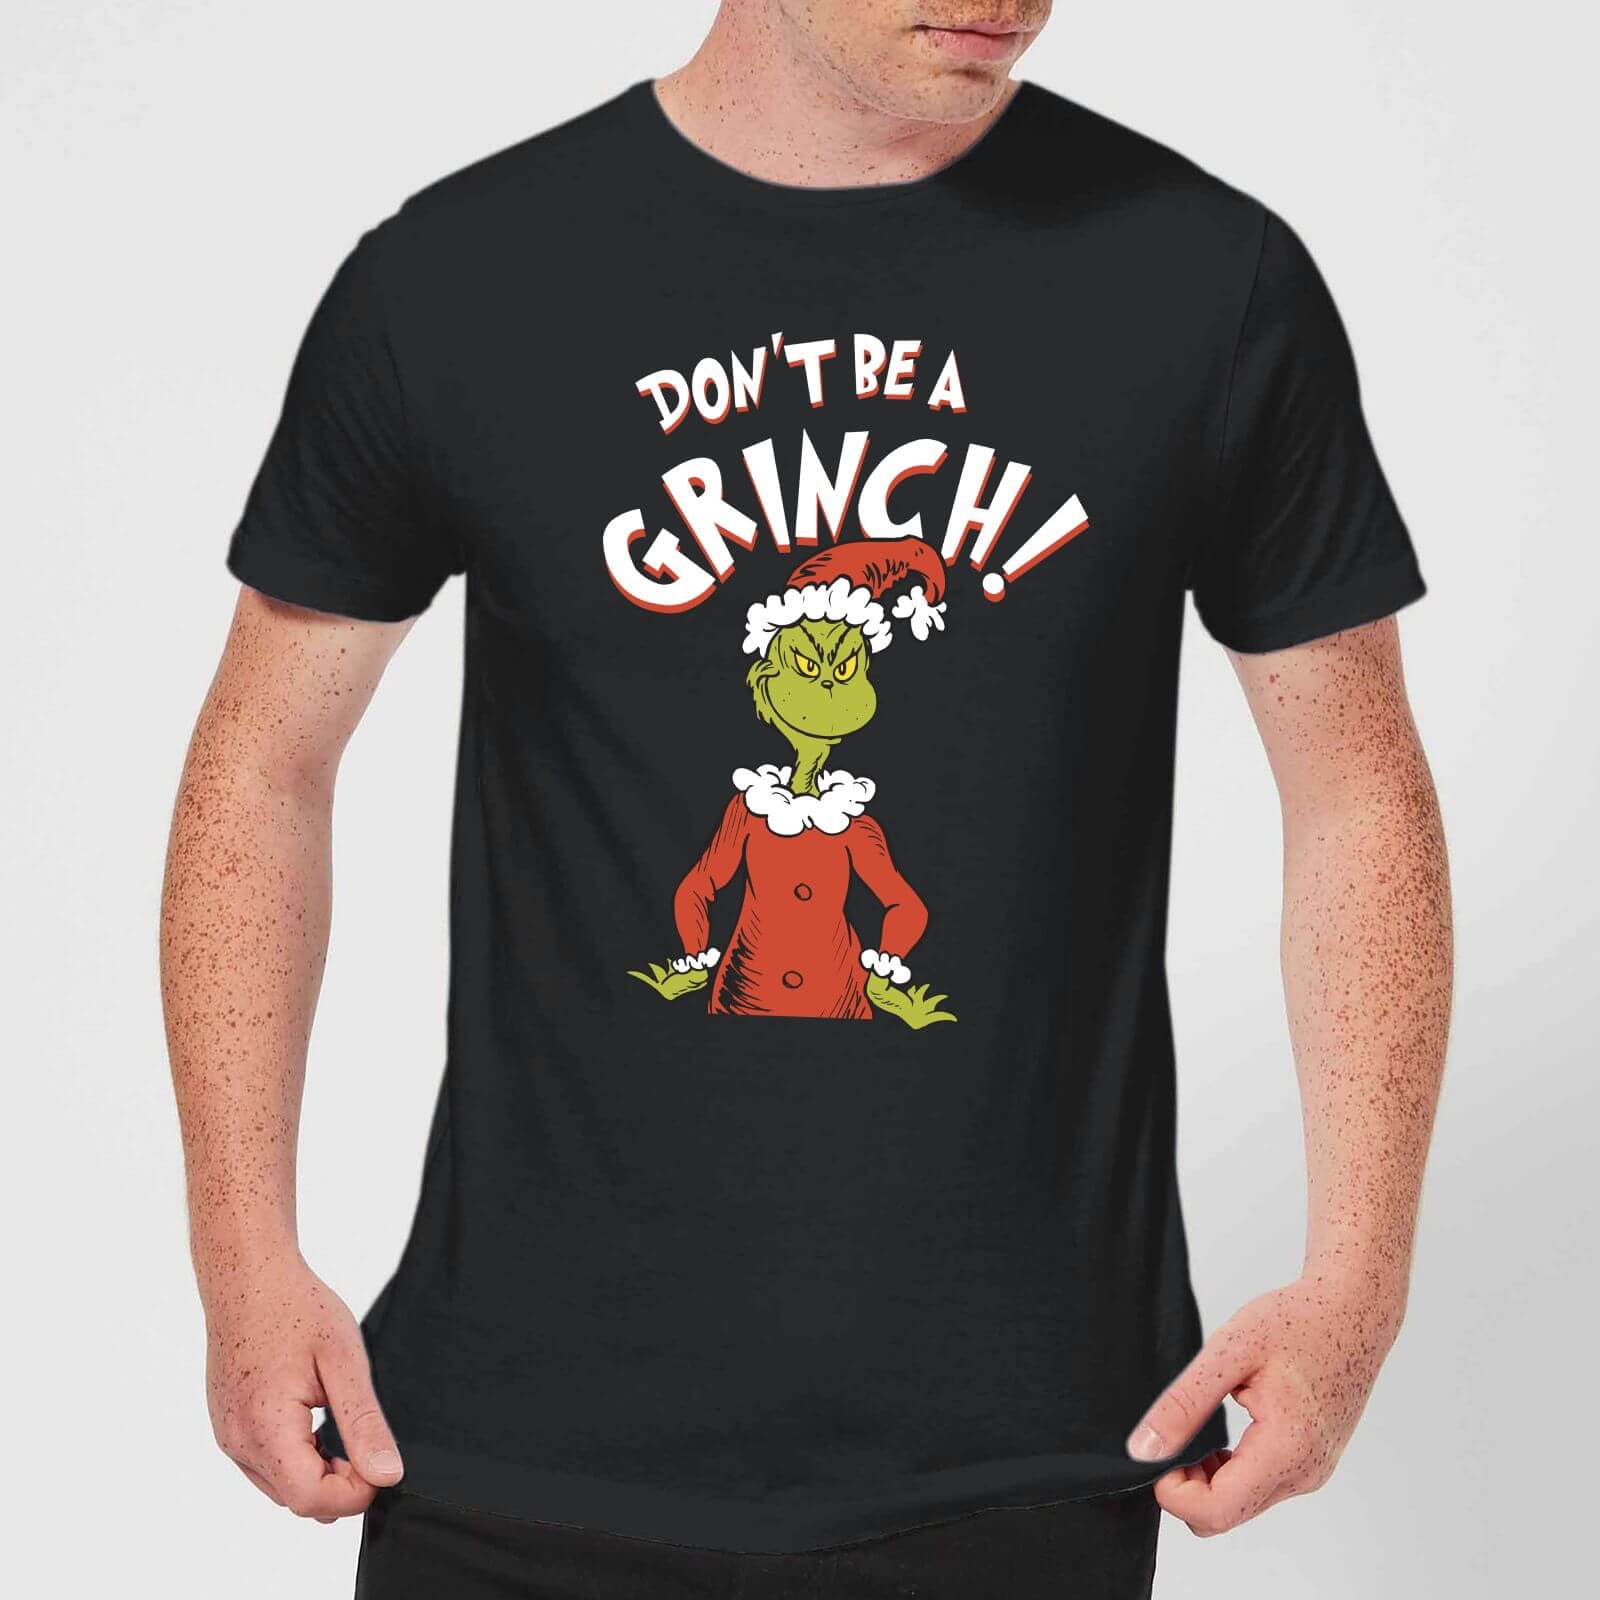 The Grinch Dont Be A Grinch Men's Christmas T-Shirt - Black - XS